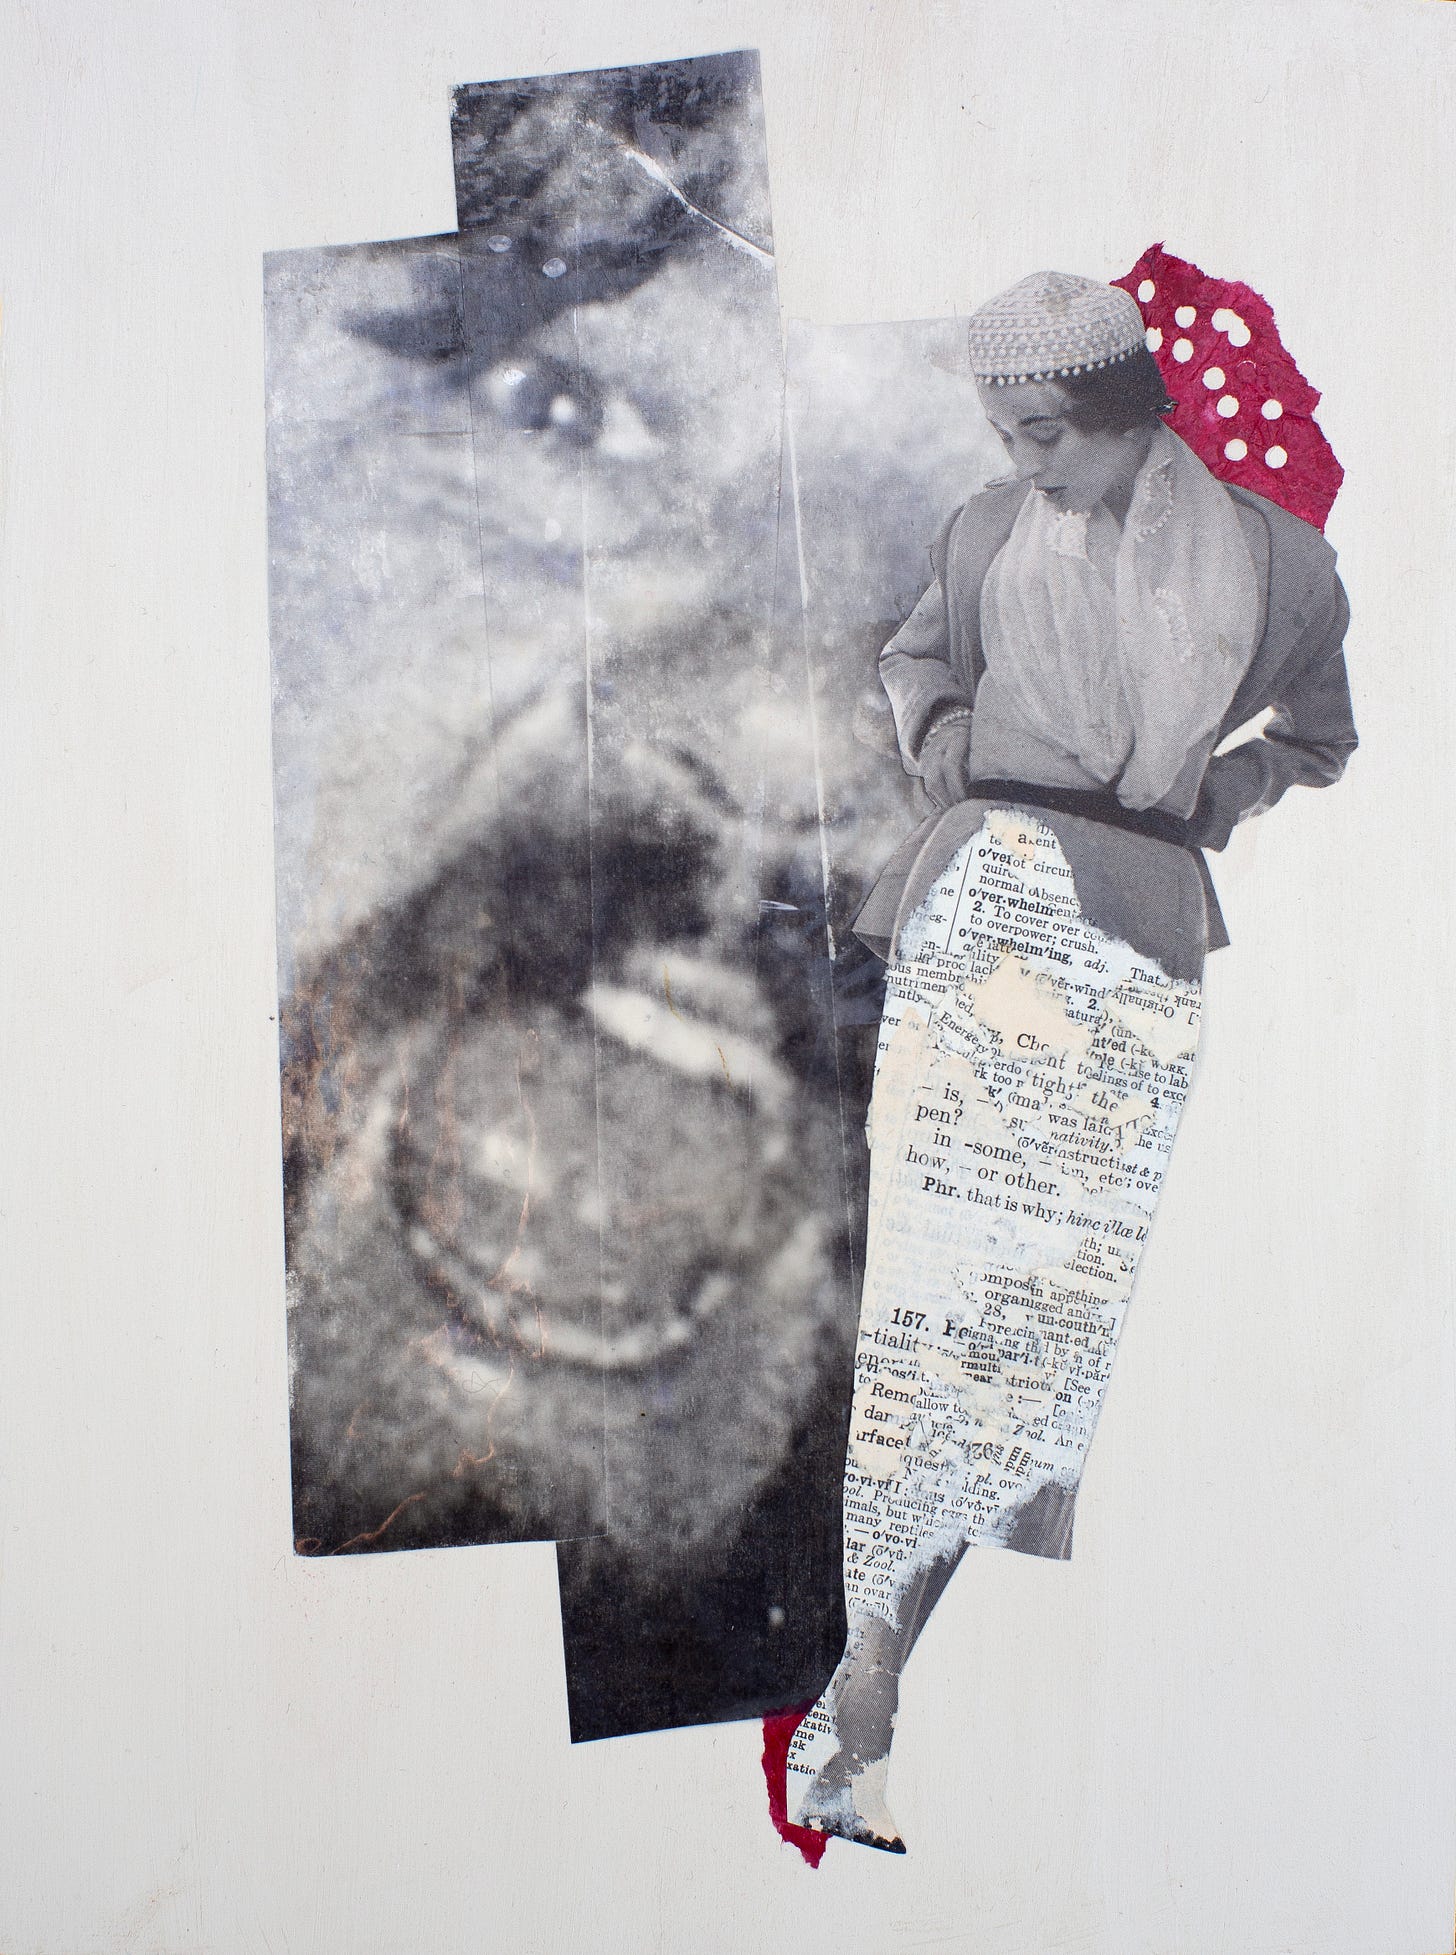 analog collage; background is an image transfer of a screaming man, and in the foreground is a black-and-white woman with layered words creeping over her body, consuming it.